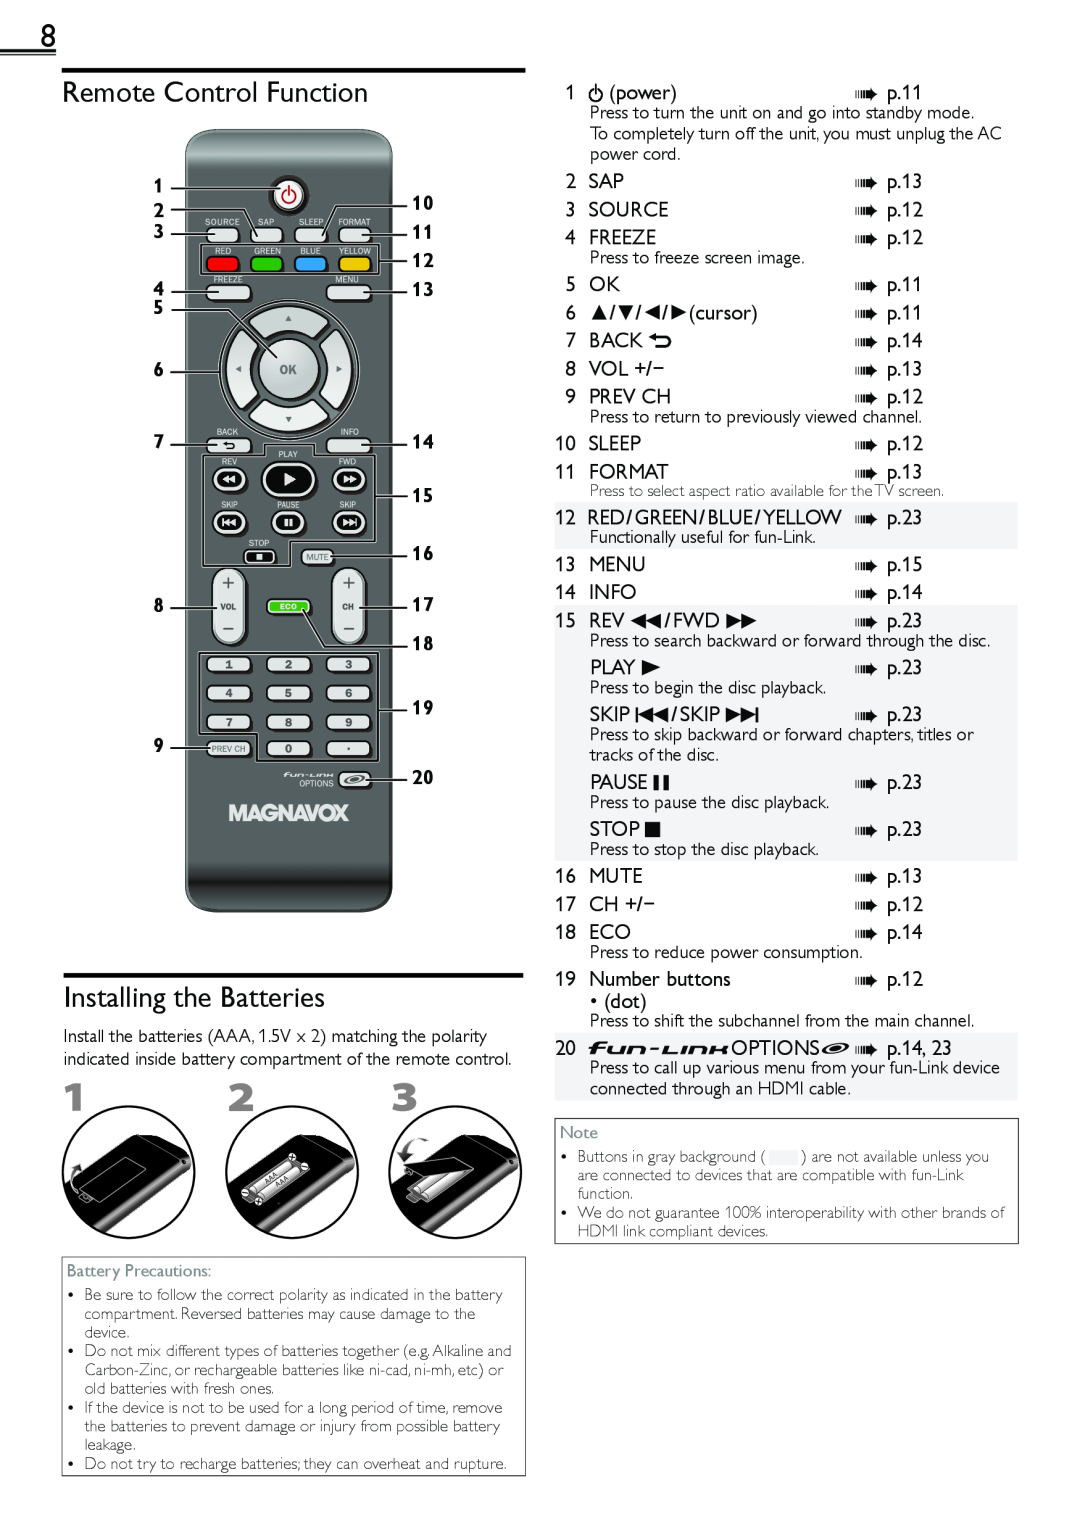 Magnavox 1-866-341-3738 Remote Control Function, Installing the Batteries, power cord, Functionally useful for fun-Link 